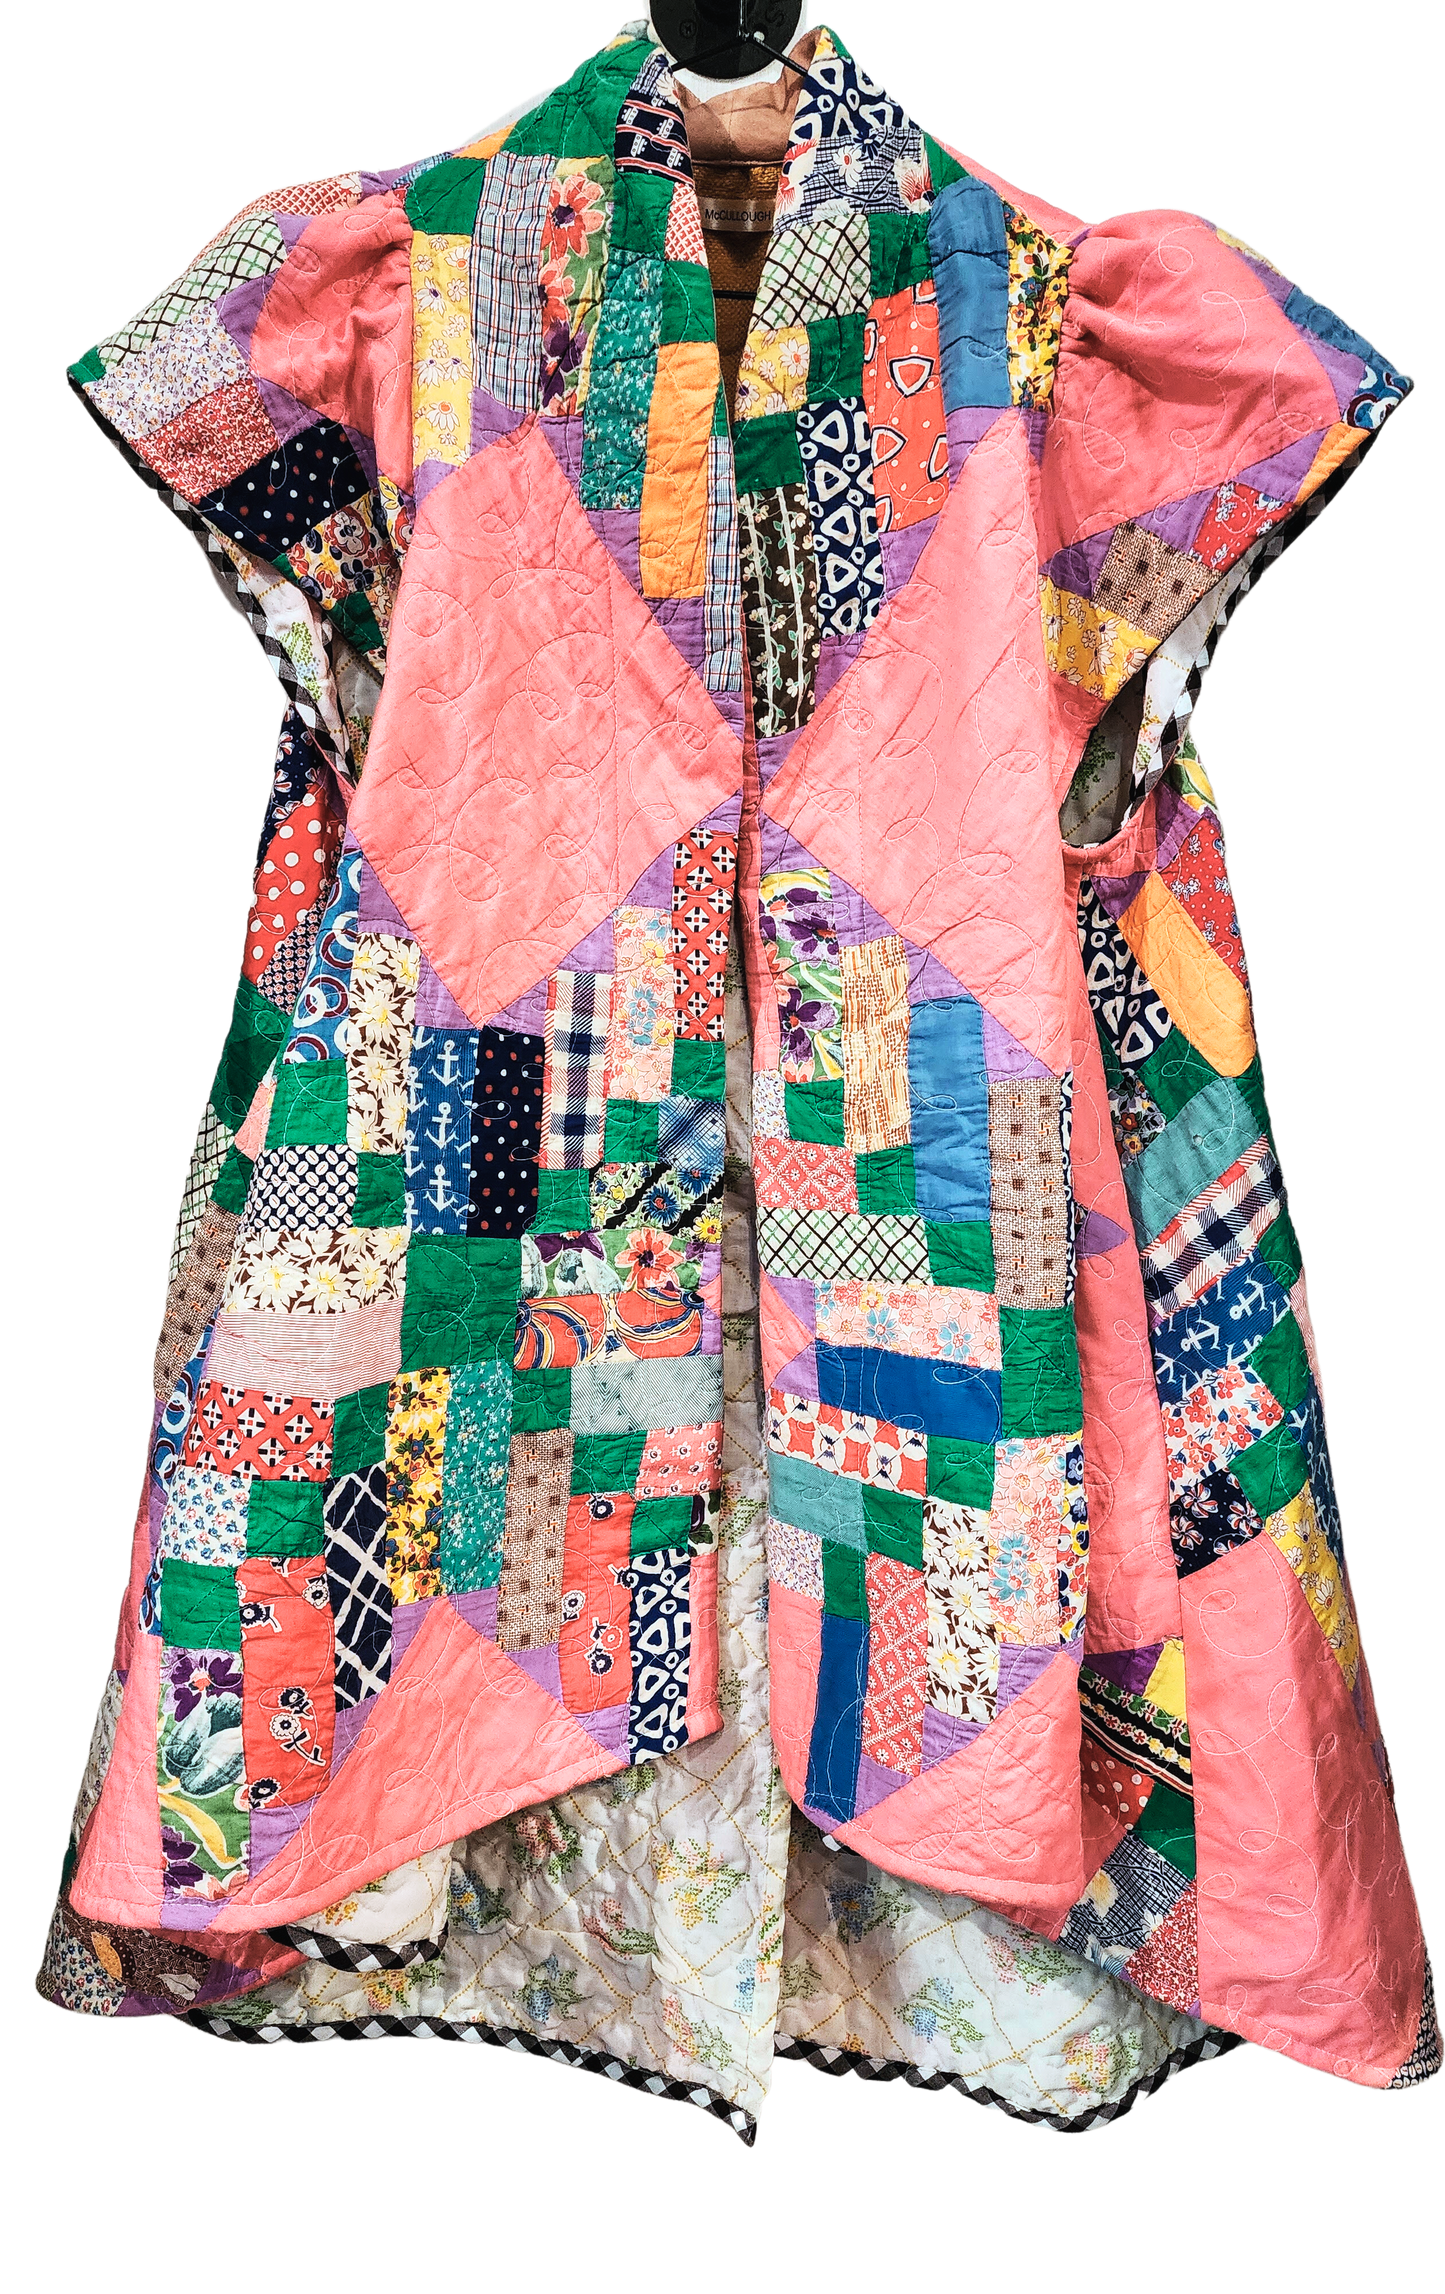 Vintage Quilt Jacket - All Season Split Back with Hi-Low Hemline - Pink & Patchwork with Puffy Cap Sleeve